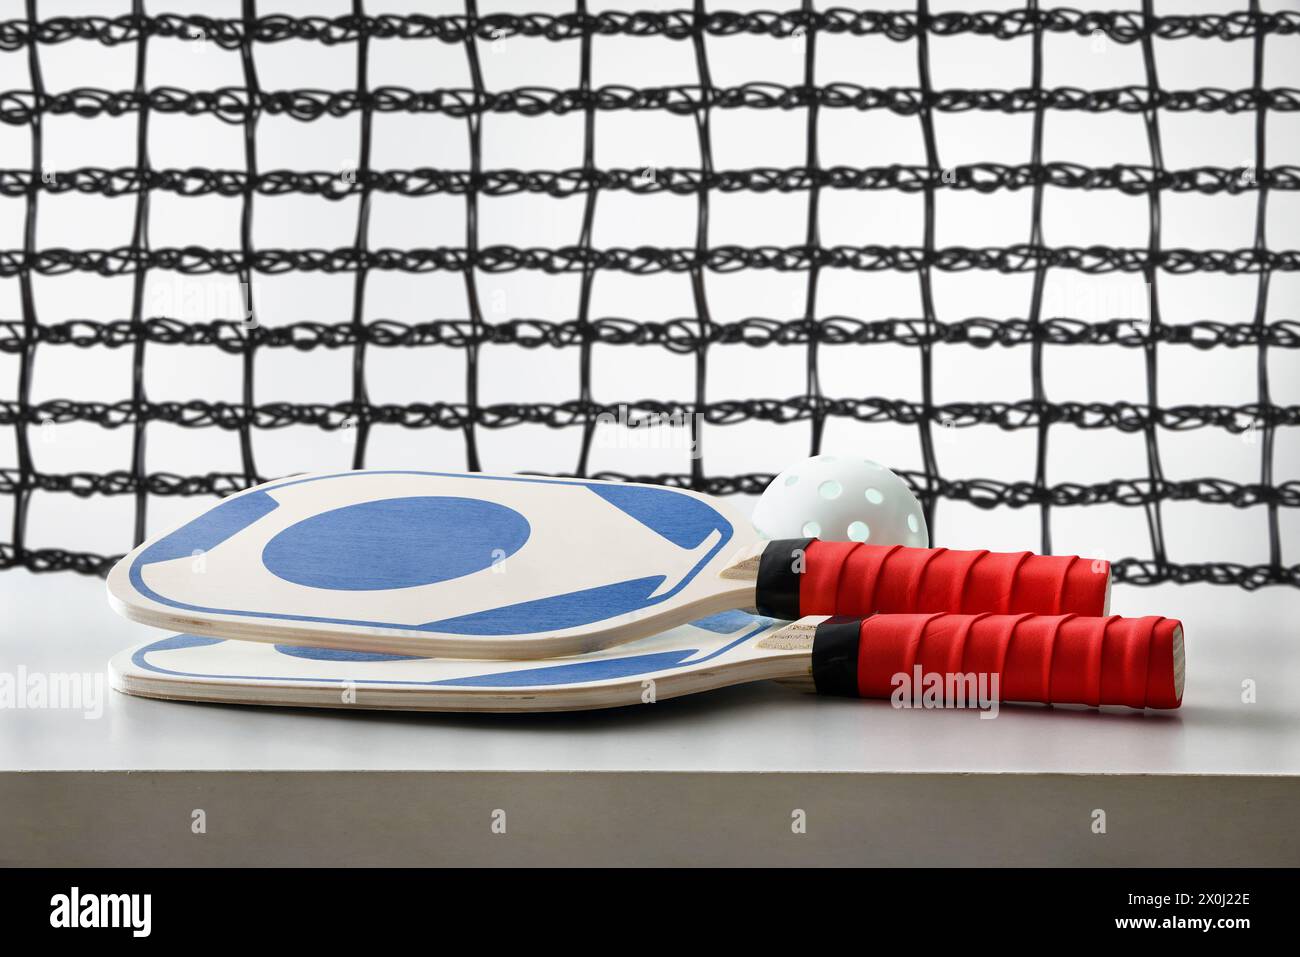 Two blue and red pickleball rackets and a white ball on white table isolated with a game network in the background. Front view. Stock Photo